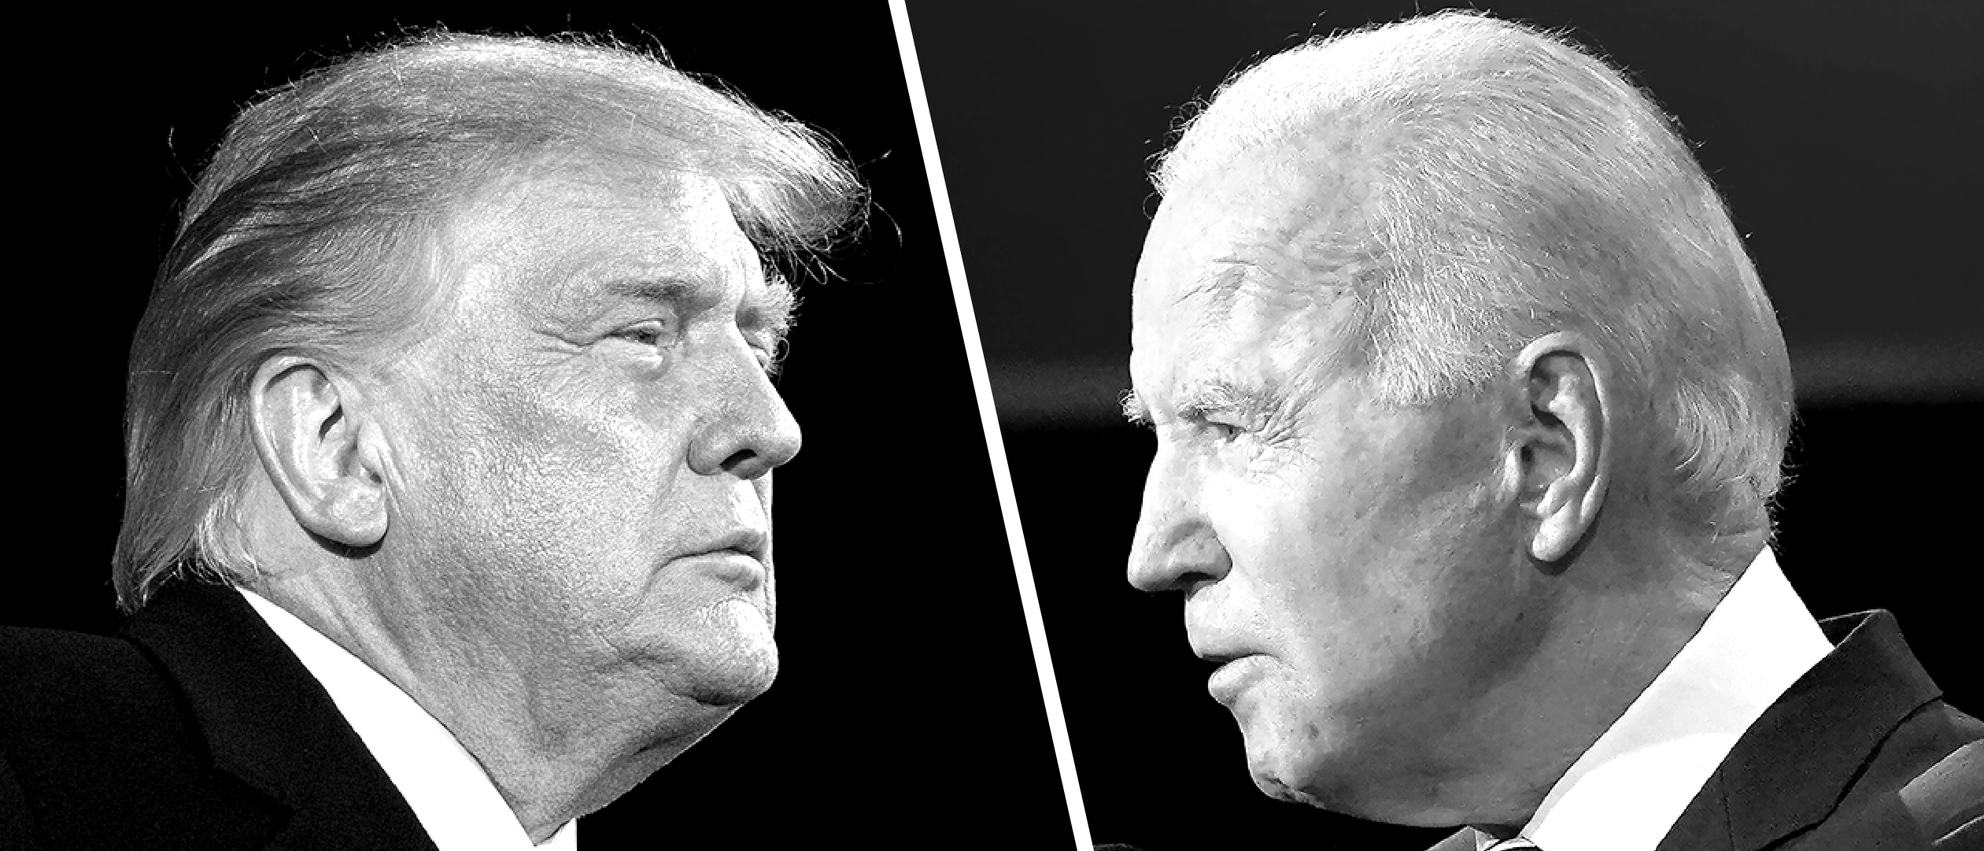 2020 Debate Trump, Biden exchanged insults, argued and ignored rules